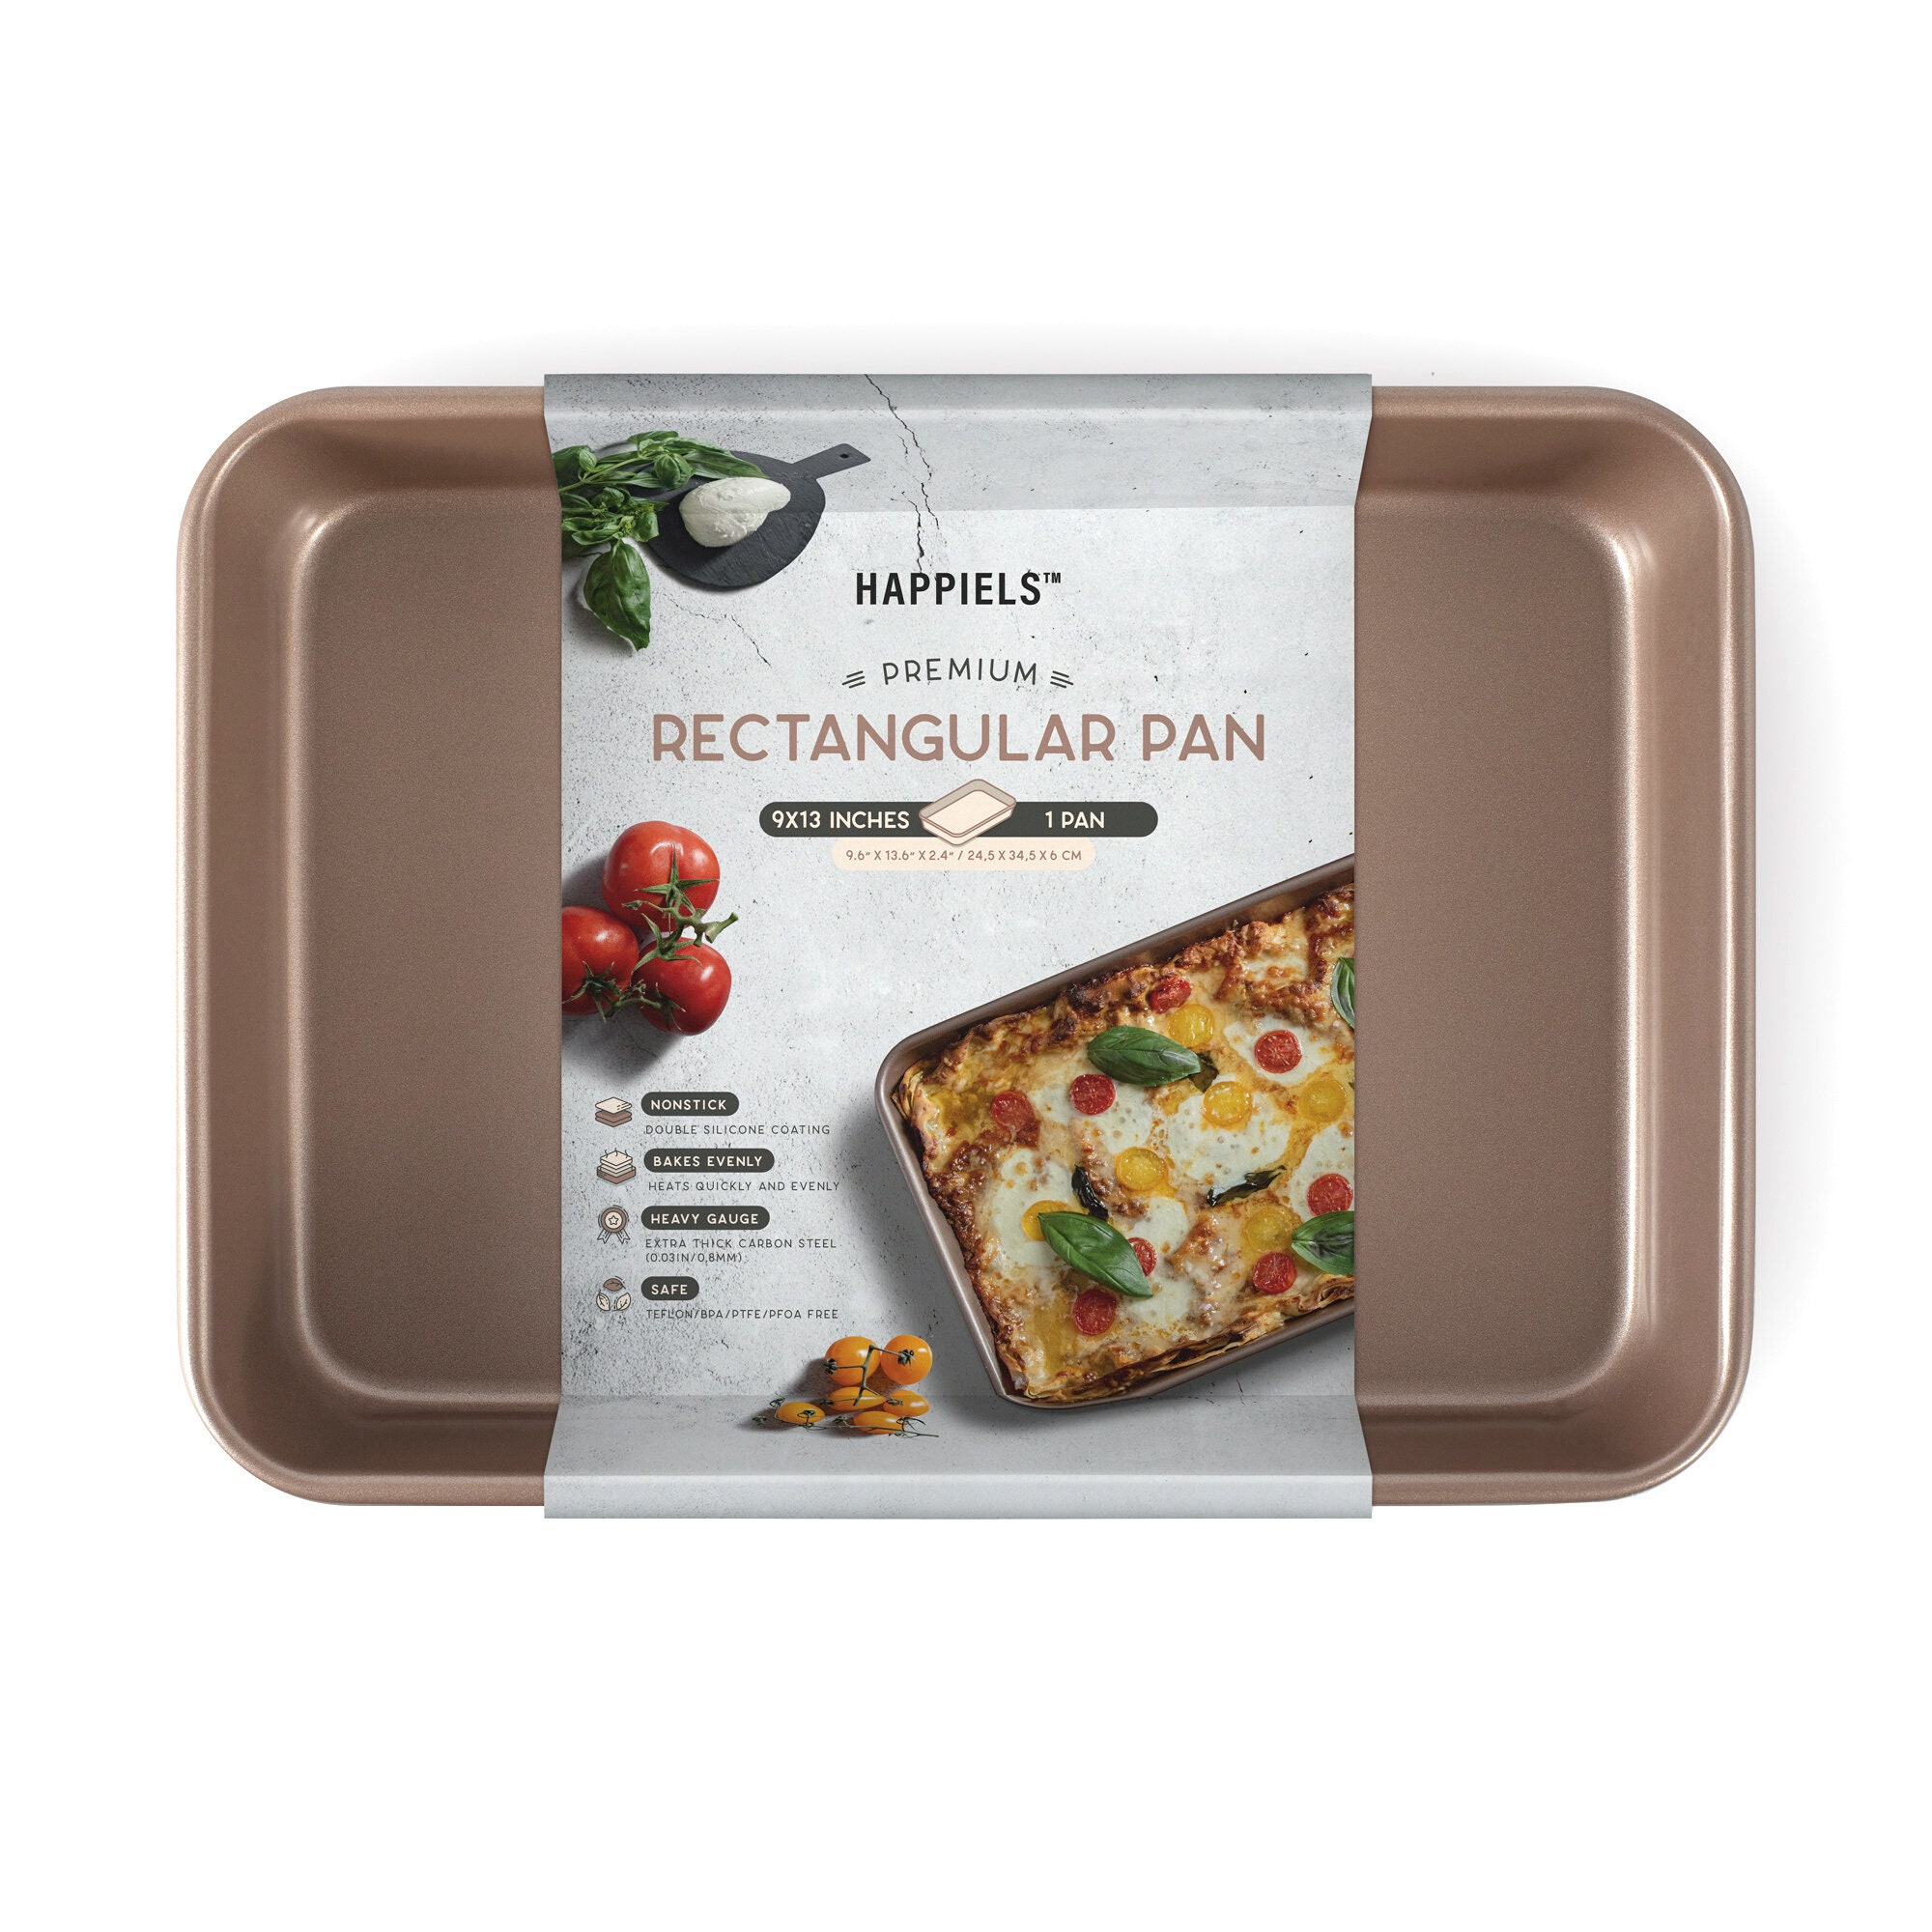  Wilton Recipe Right Non-Stick Baking Pan with Lid, 9 x 13-Inch,  Steel : Sports & Outdoors